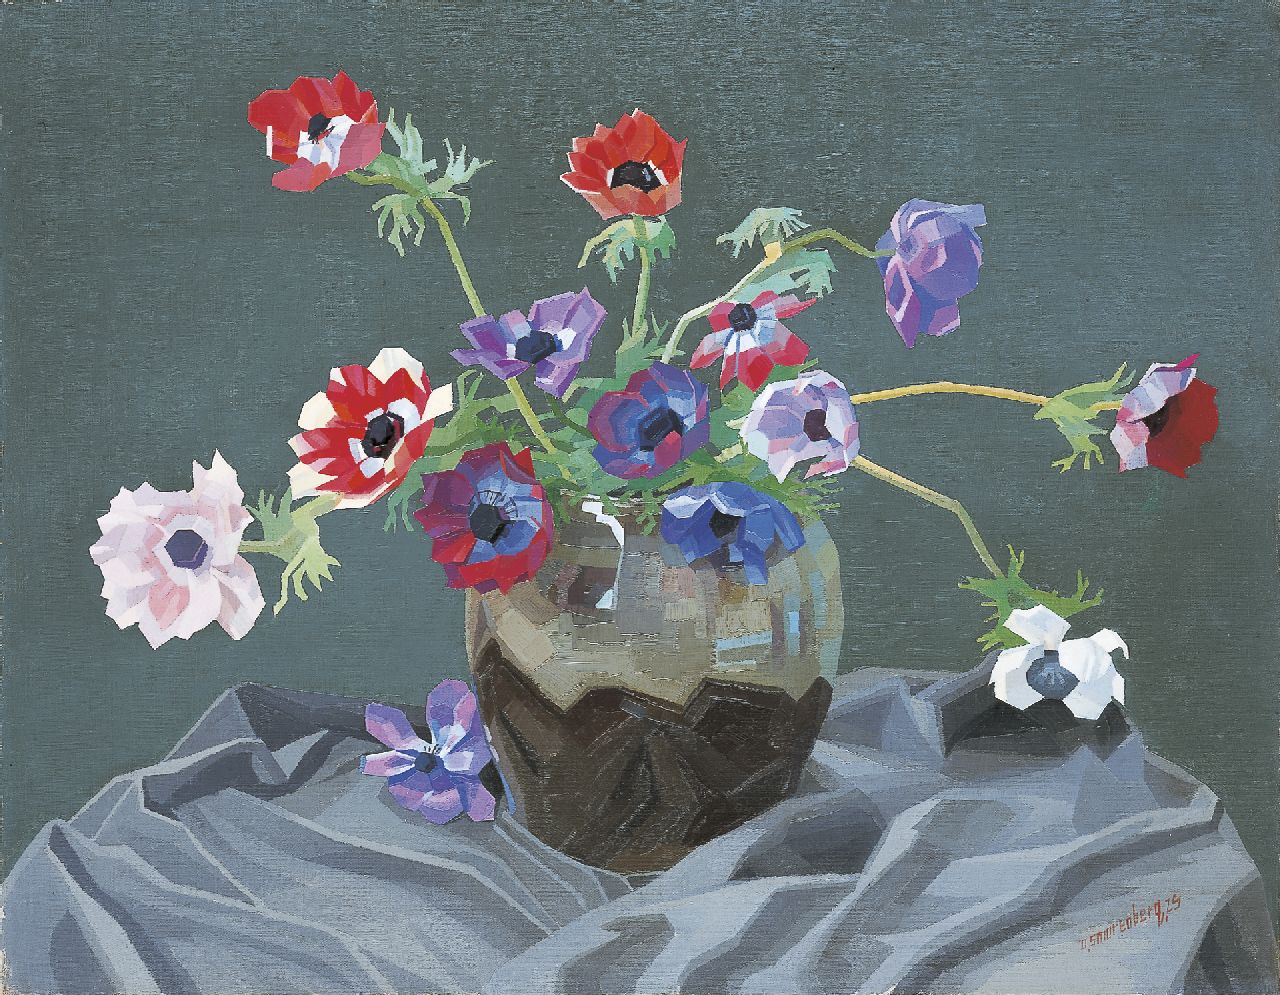 Smorenberg D.  | Dirk Smorenberg, Anemones in a vase, oil on canvas 55.2 x 70.5 cm, signed l.r. and dated '25